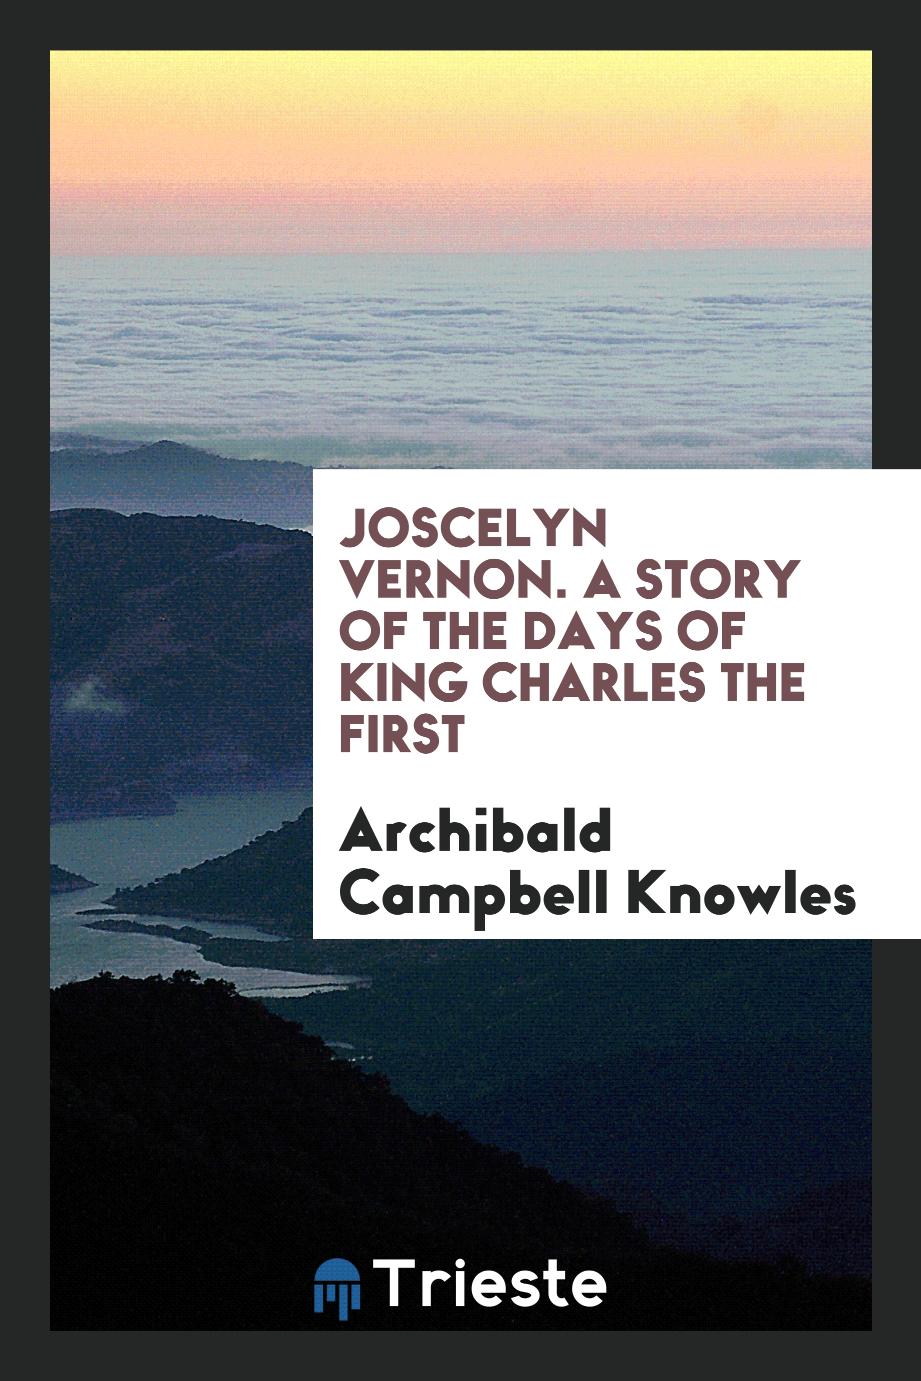 Joscelyn Vernon. A Story of the Days of King Charles the First